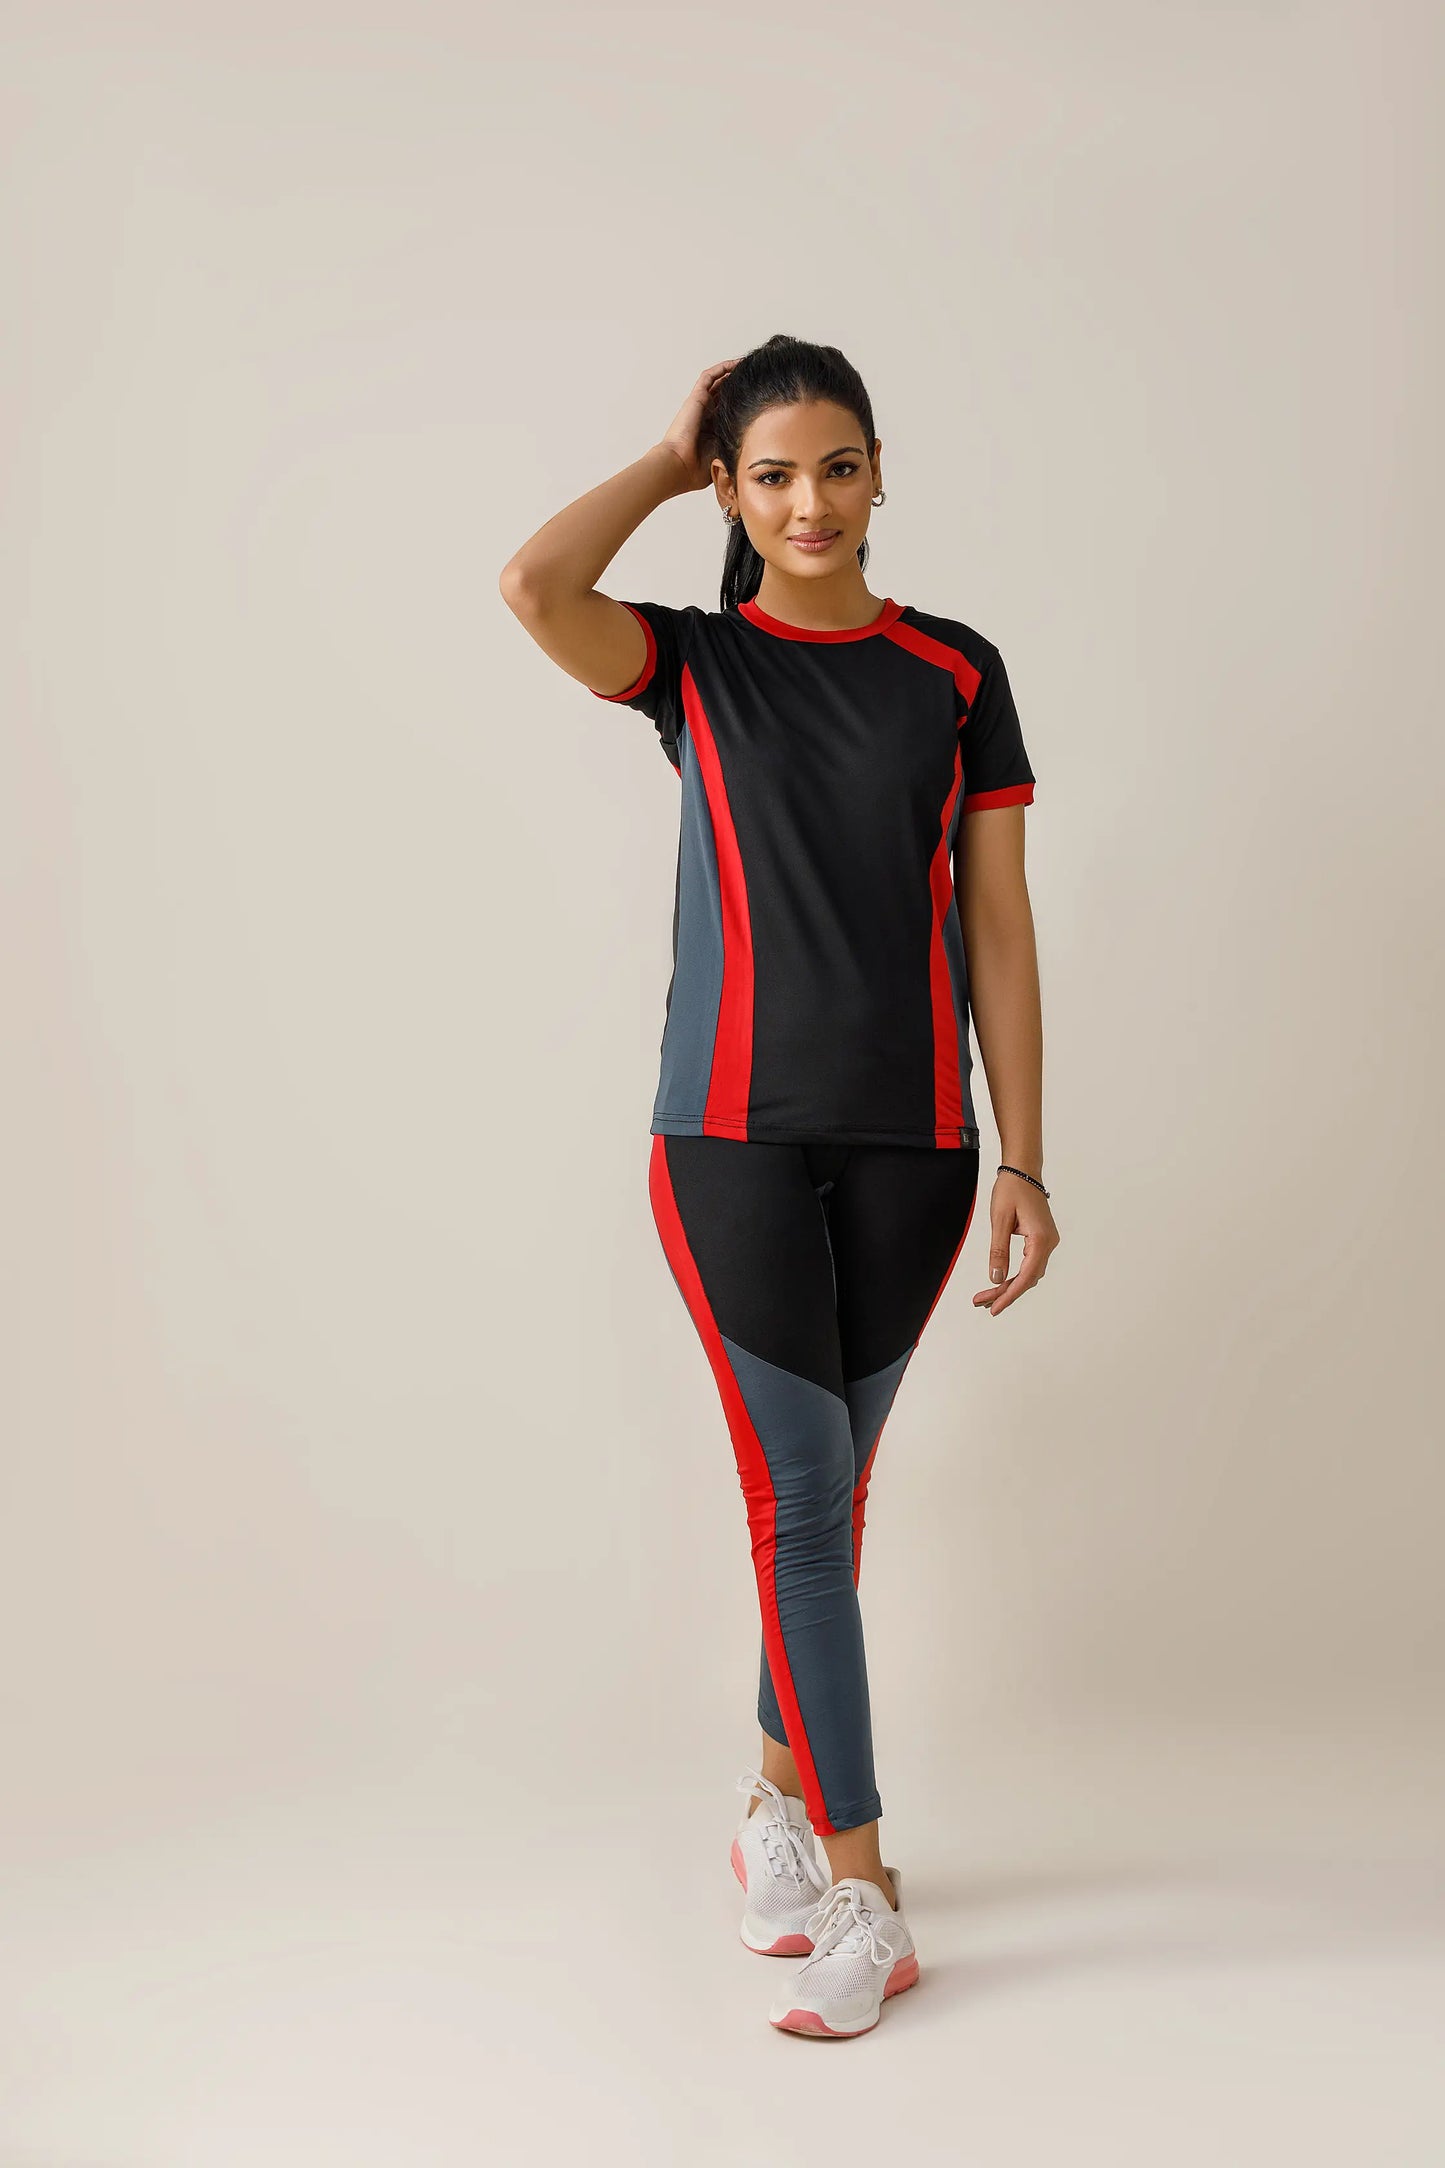 Activewear pack of 2